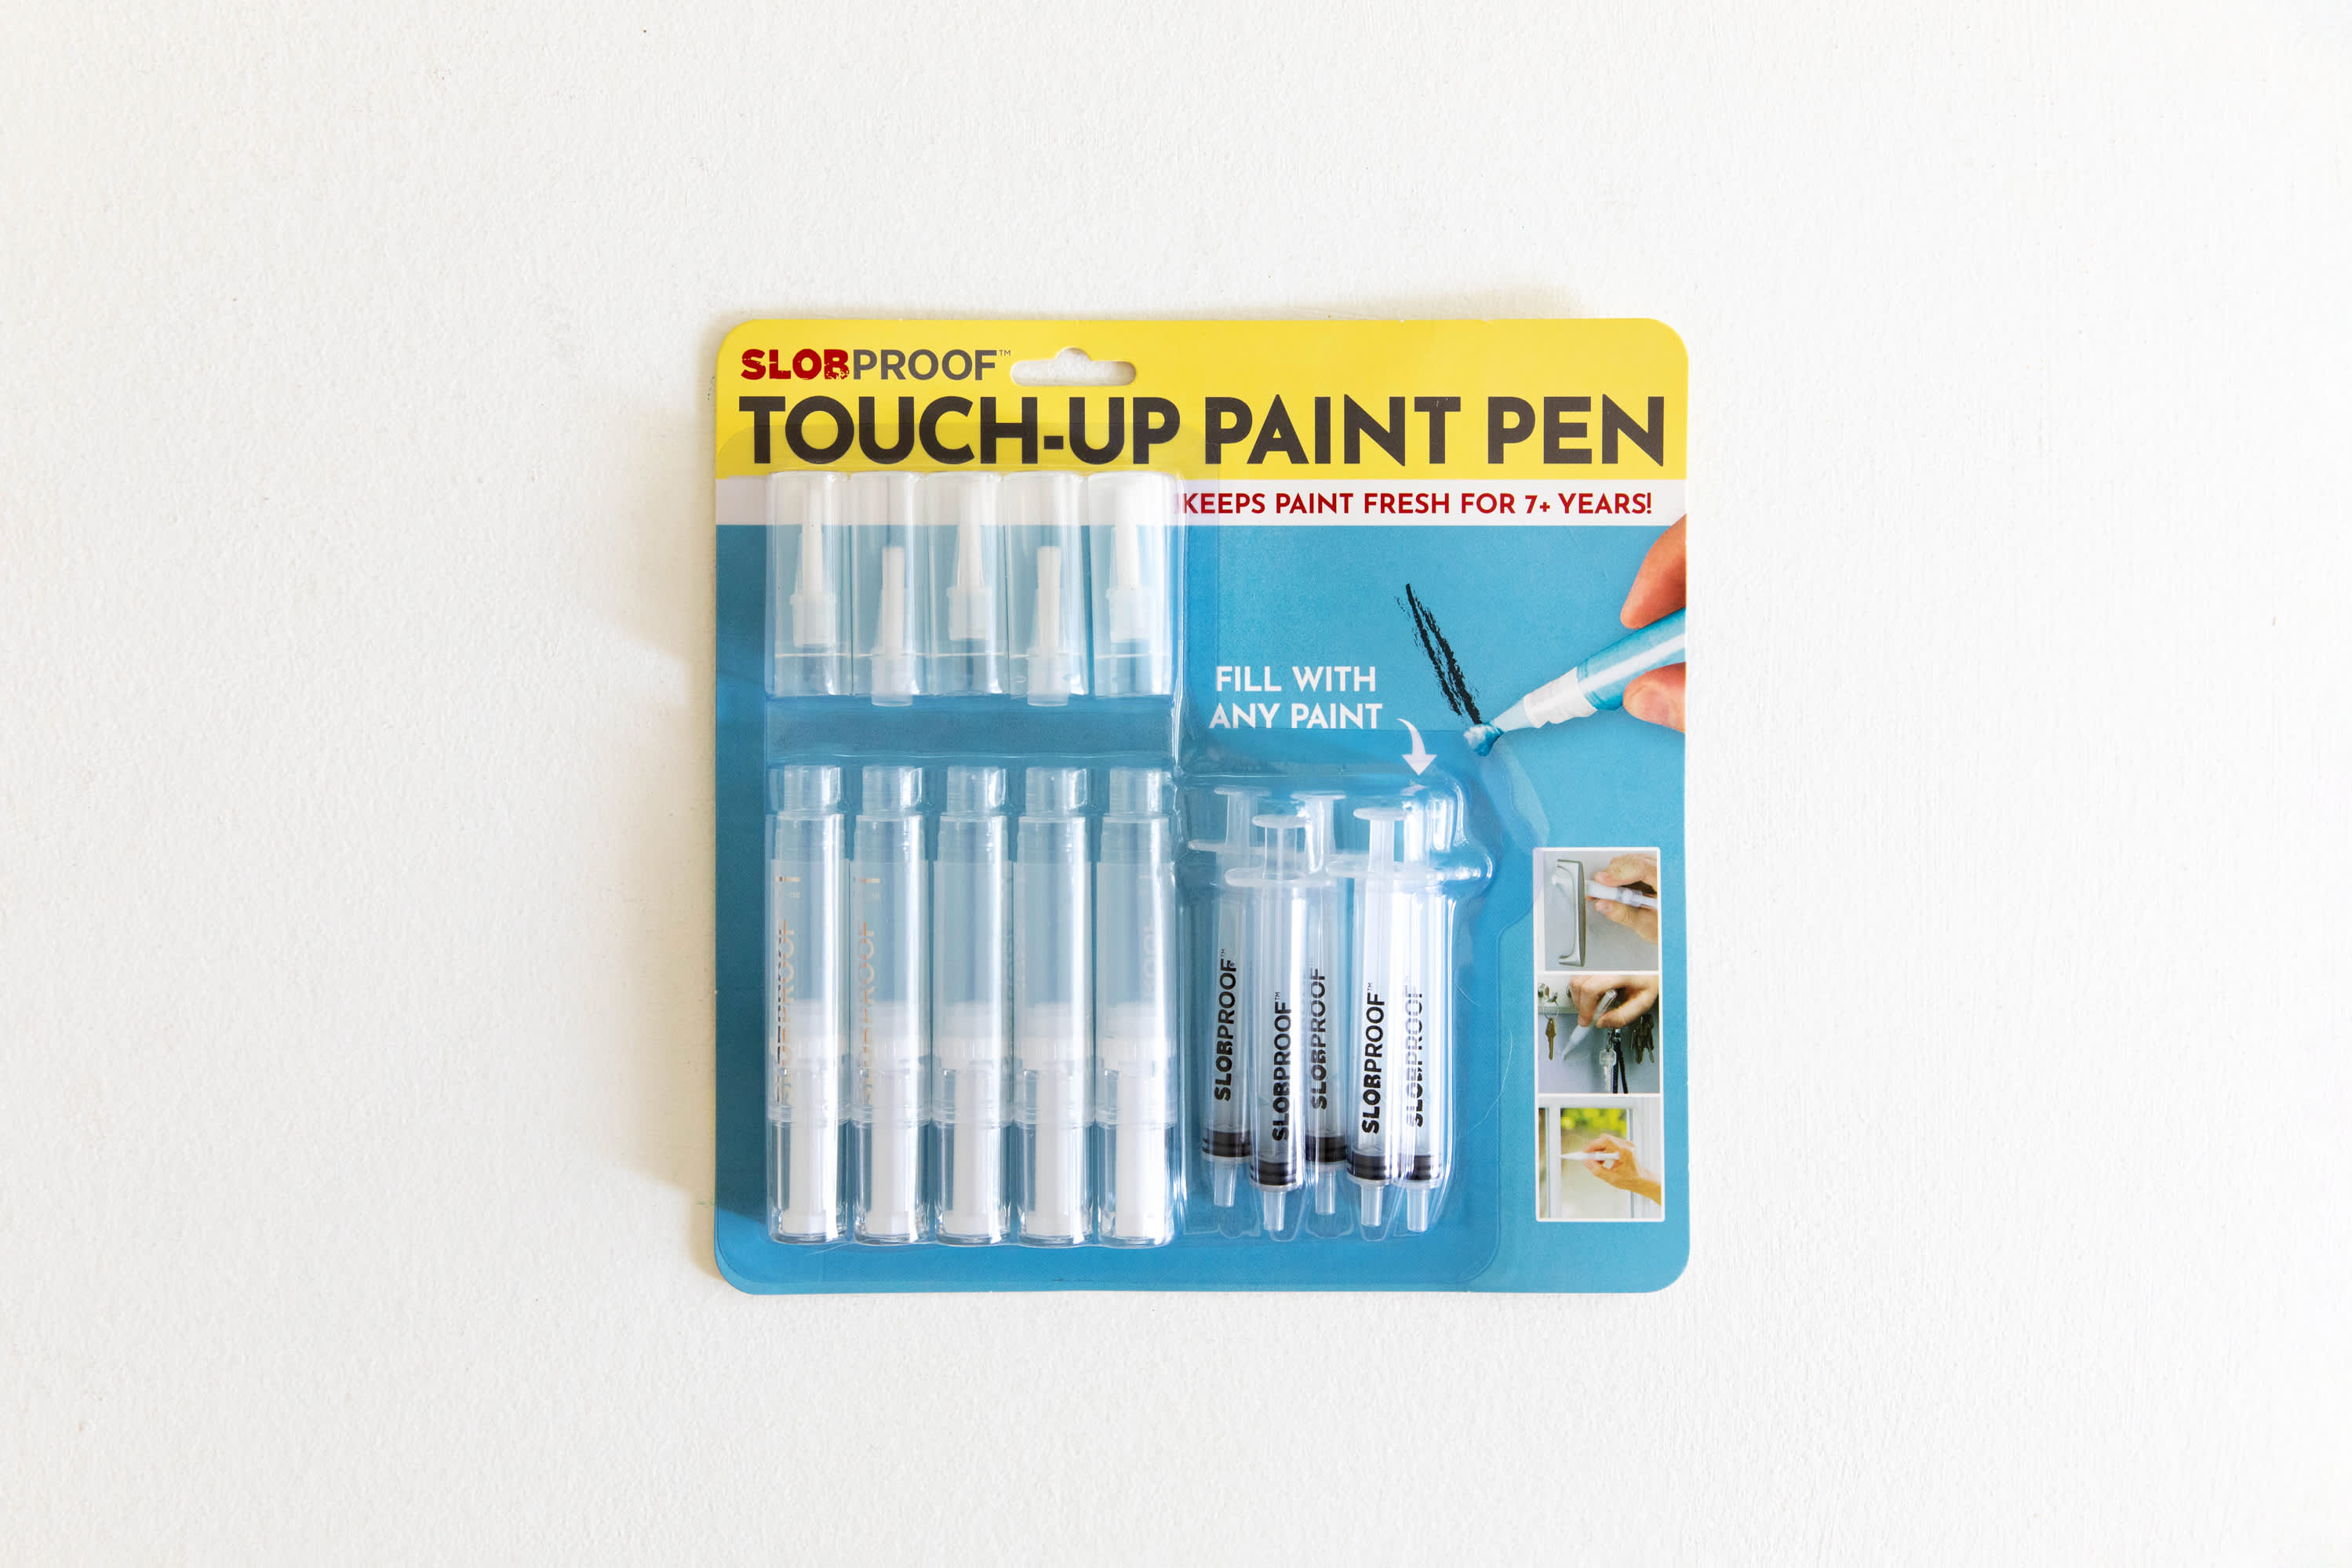  Slobproof Touch Up Paint Pen- Refillable Paint Brush Pens 2  In 1 Pack- Paint Touch Up Pen For Walls